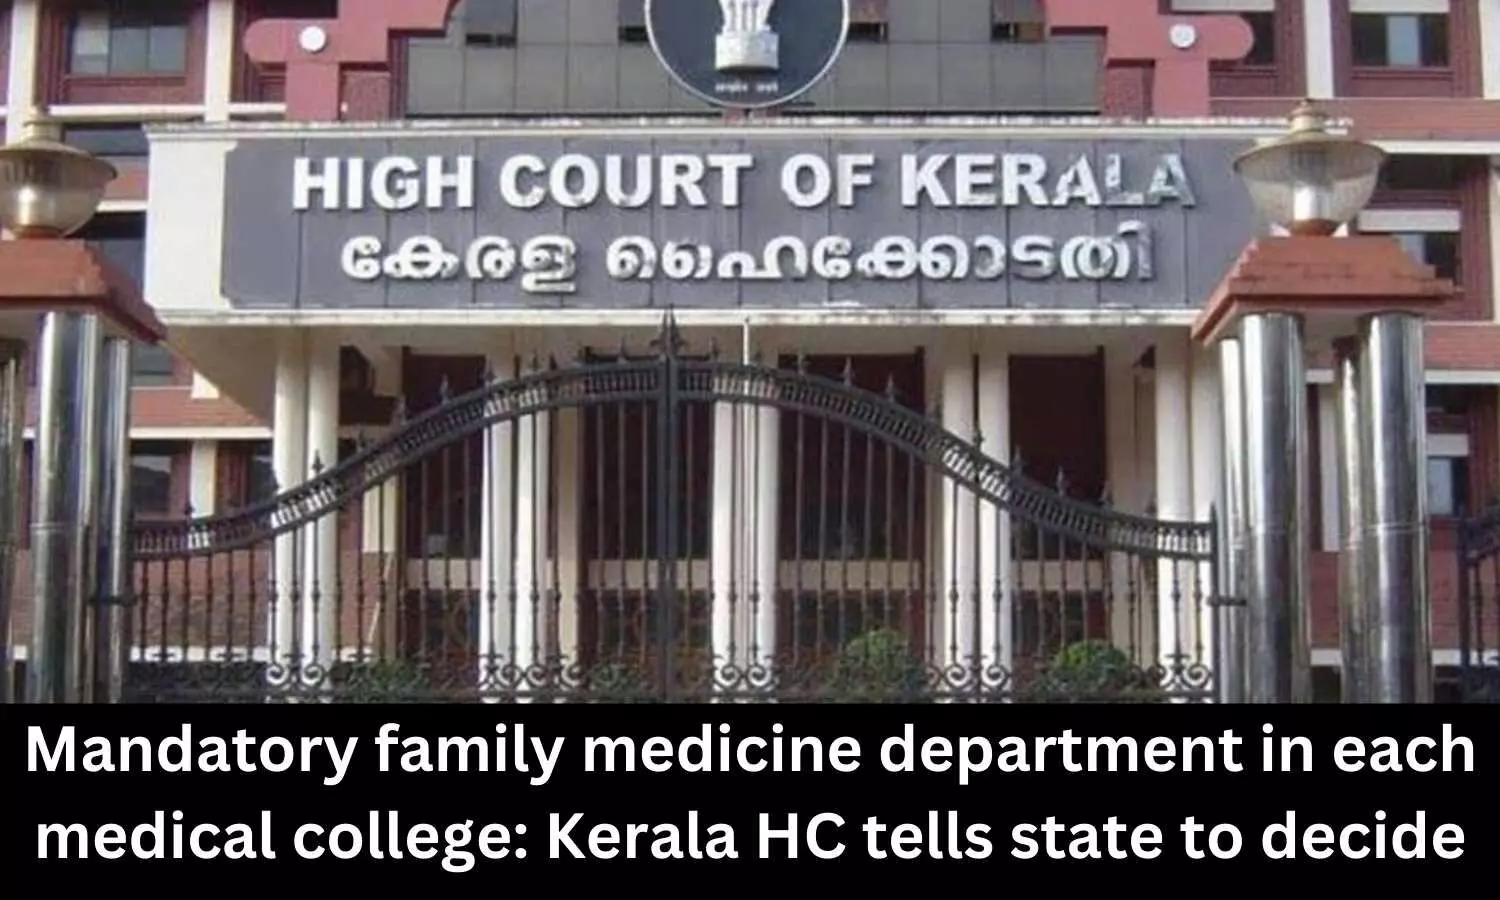 Mandatory family medicine department in each medical college: Kerala HC tells state to decide